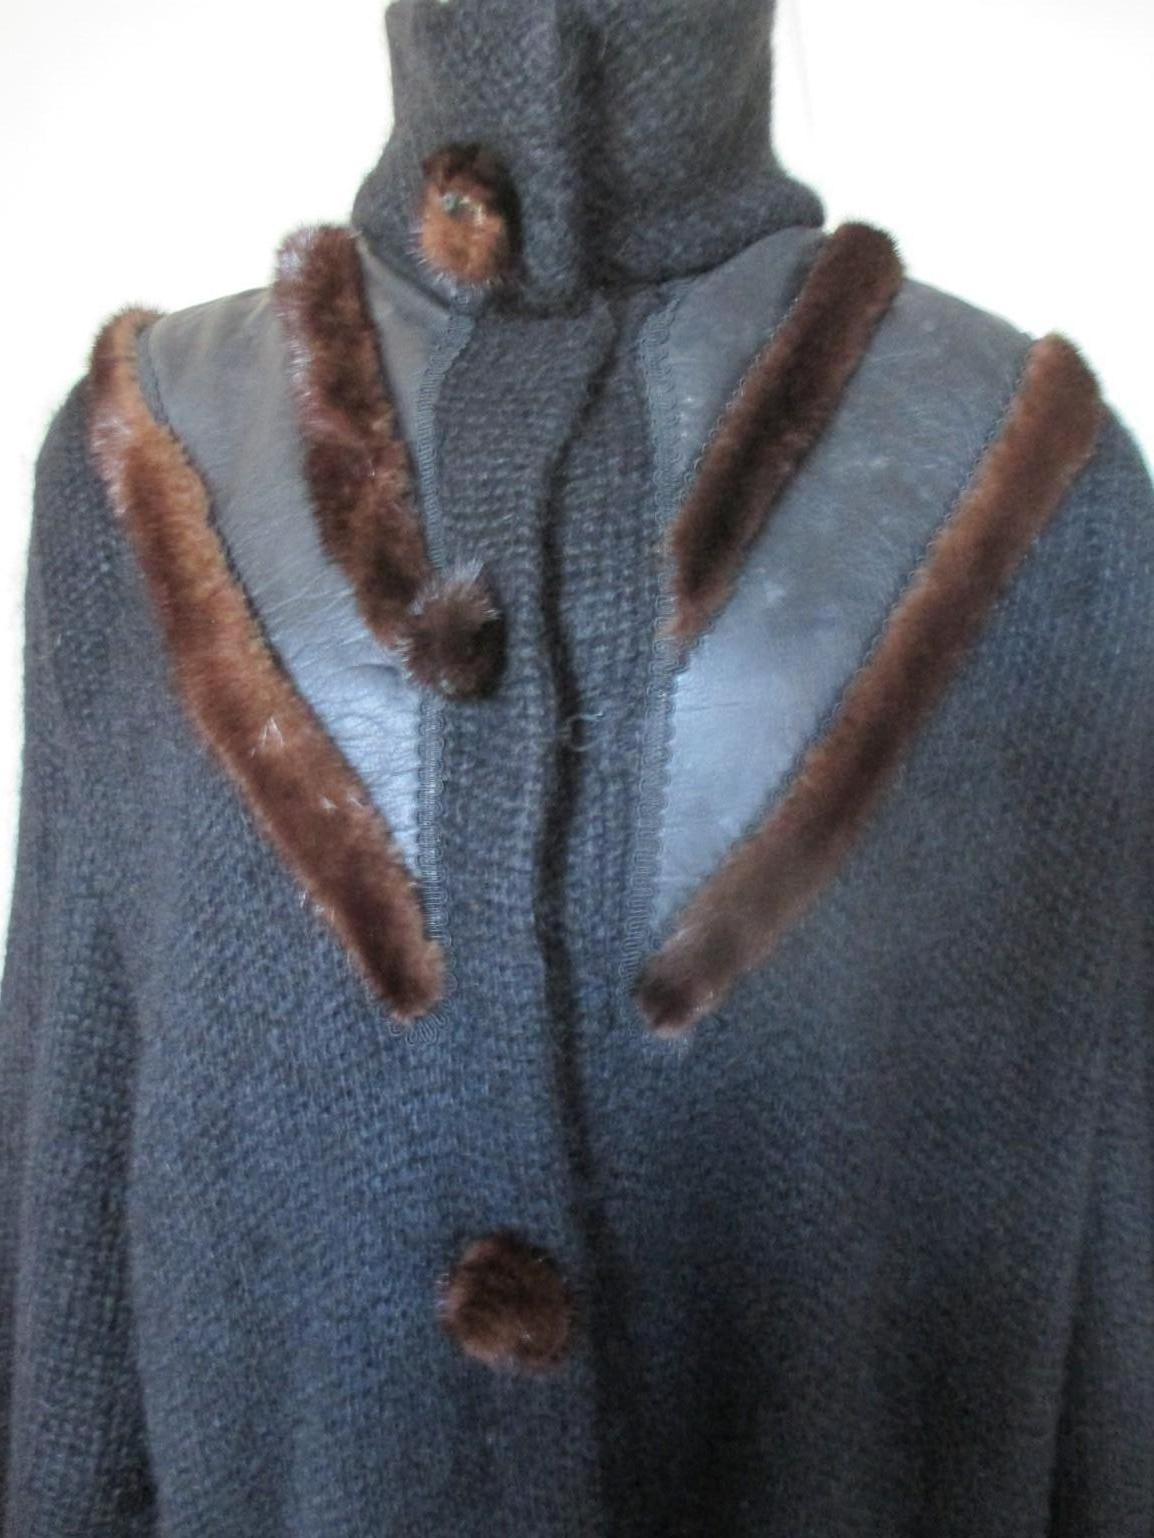 We offer more vintage fur items, view our frontstore

Fabulous original vintage 80/90s mohair wool vest/coat embroidered with brown mink fur, black leather with 3 closinghooks, 1 pressbutton at the collar and 2 pockets.
Fully lined.

Size fits as